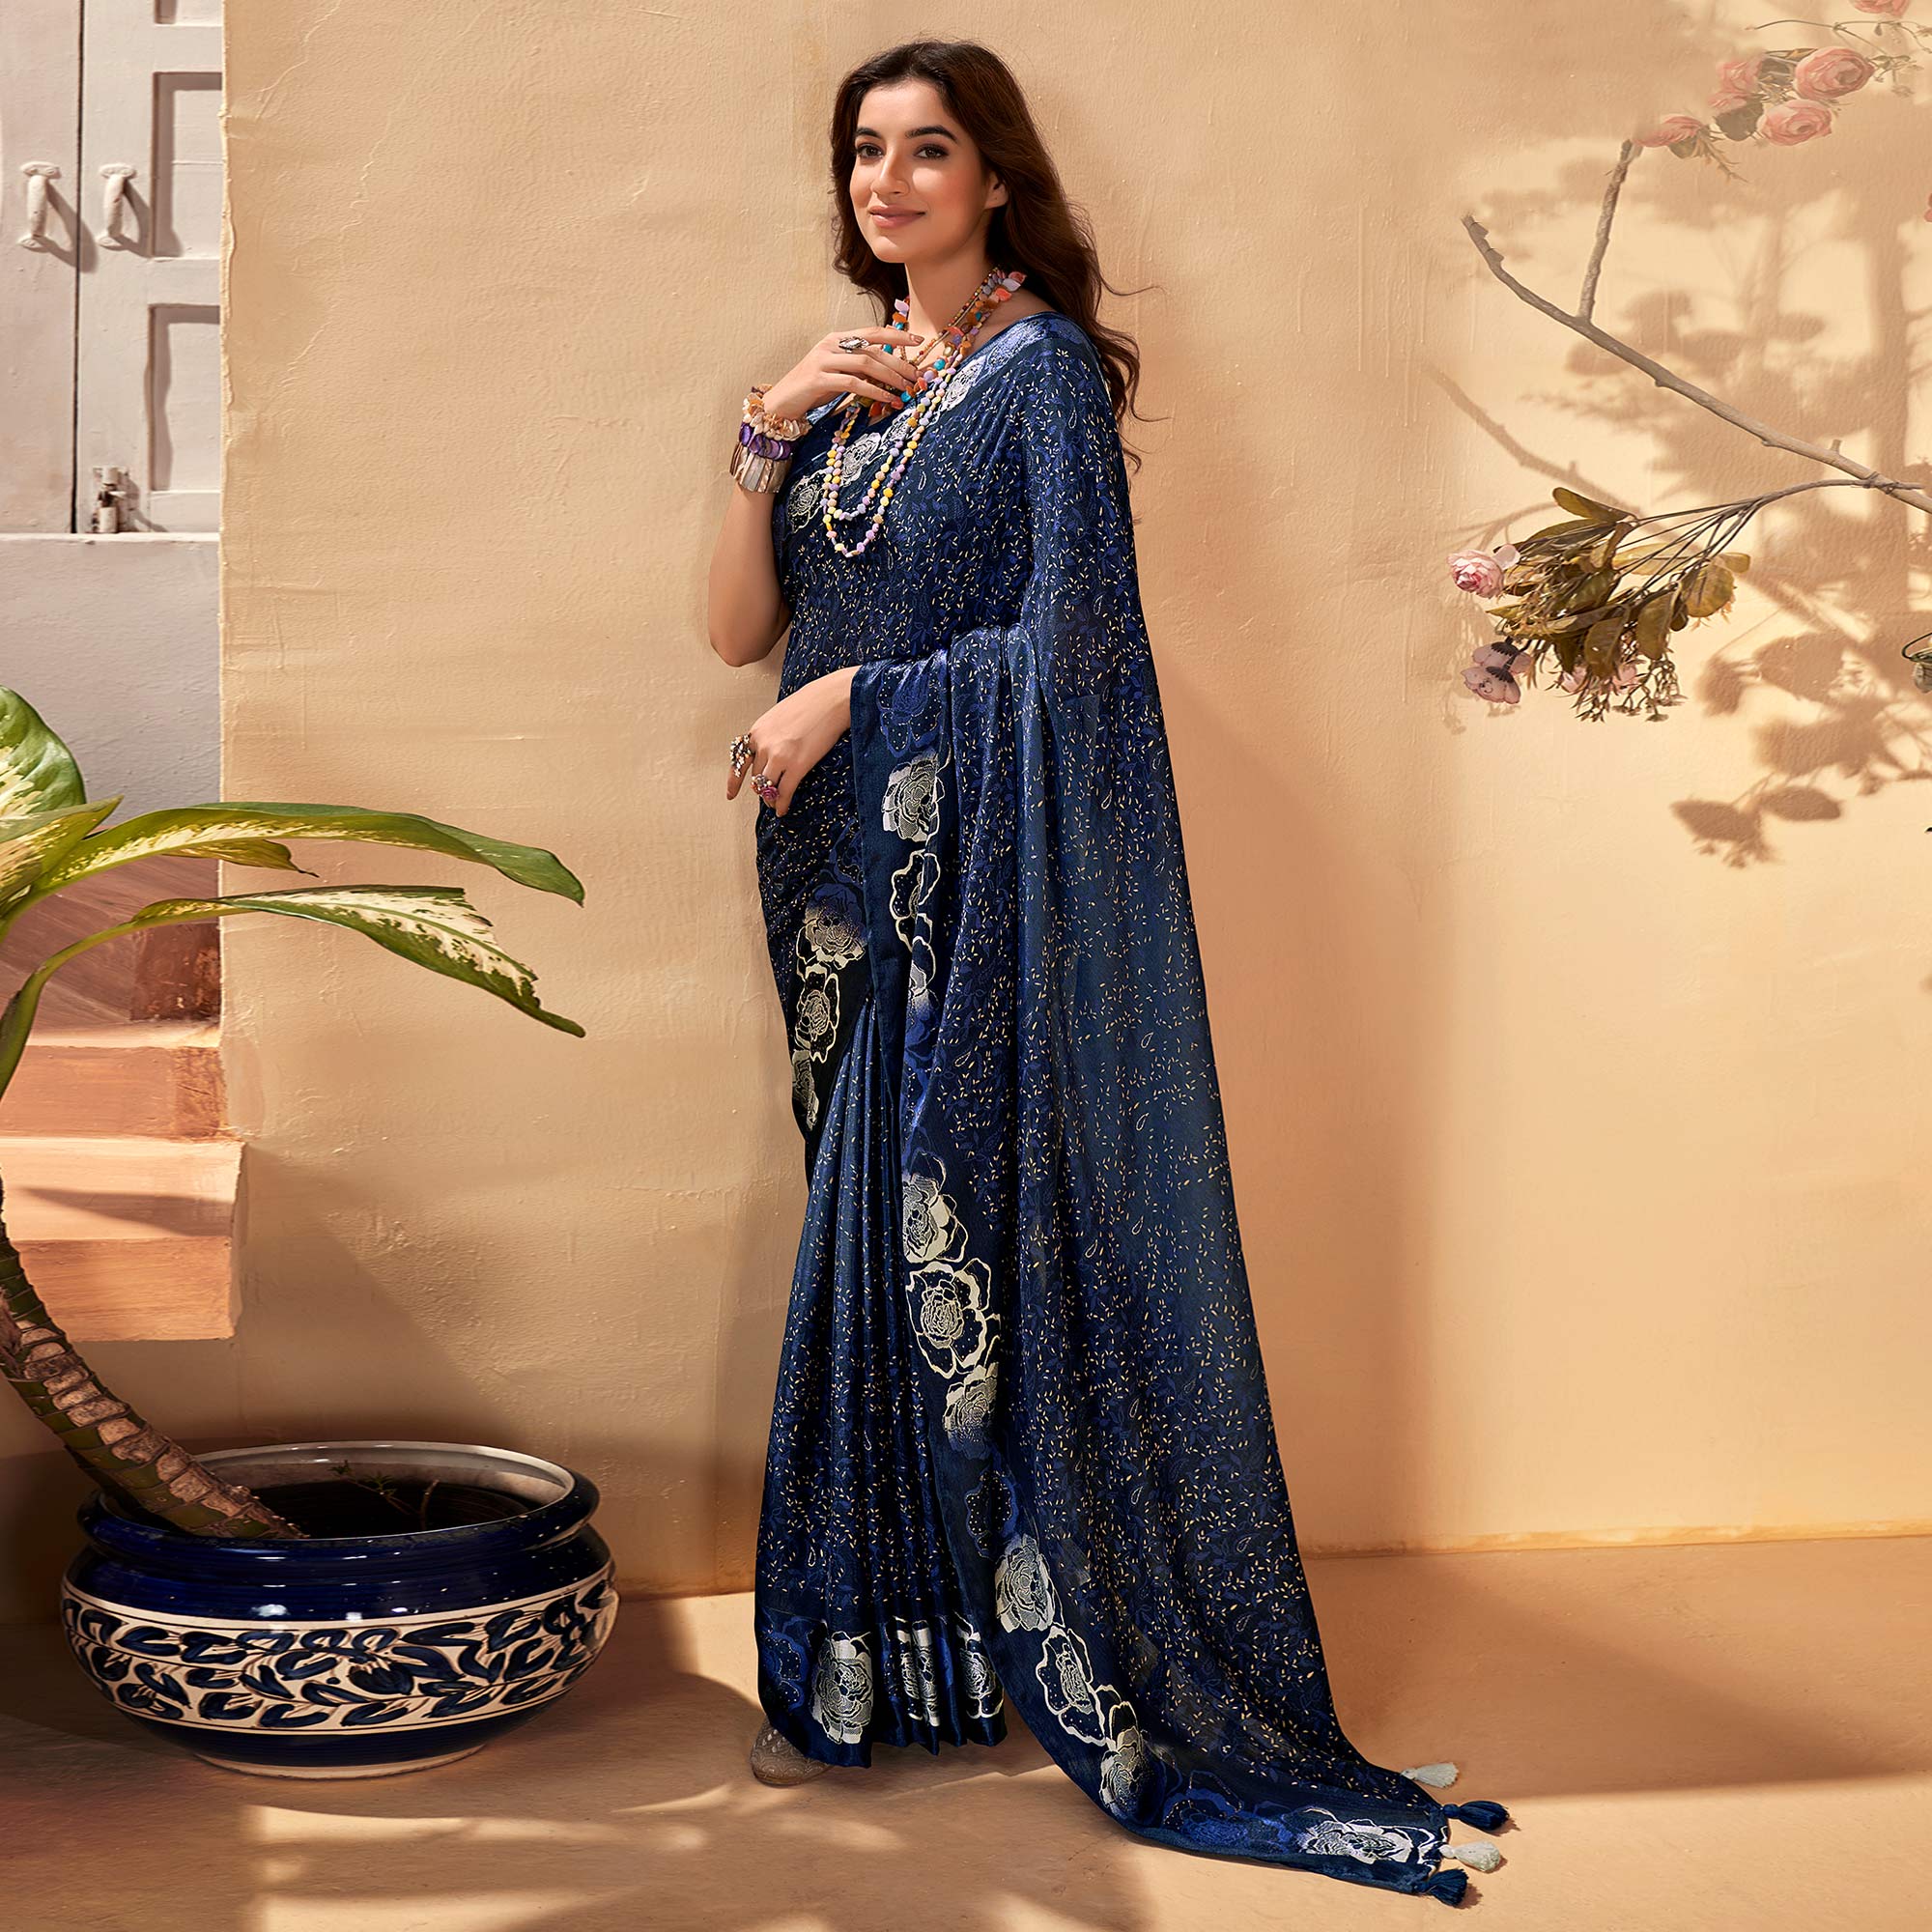 Blue Floral Printed Georgette Saree with Satin Border